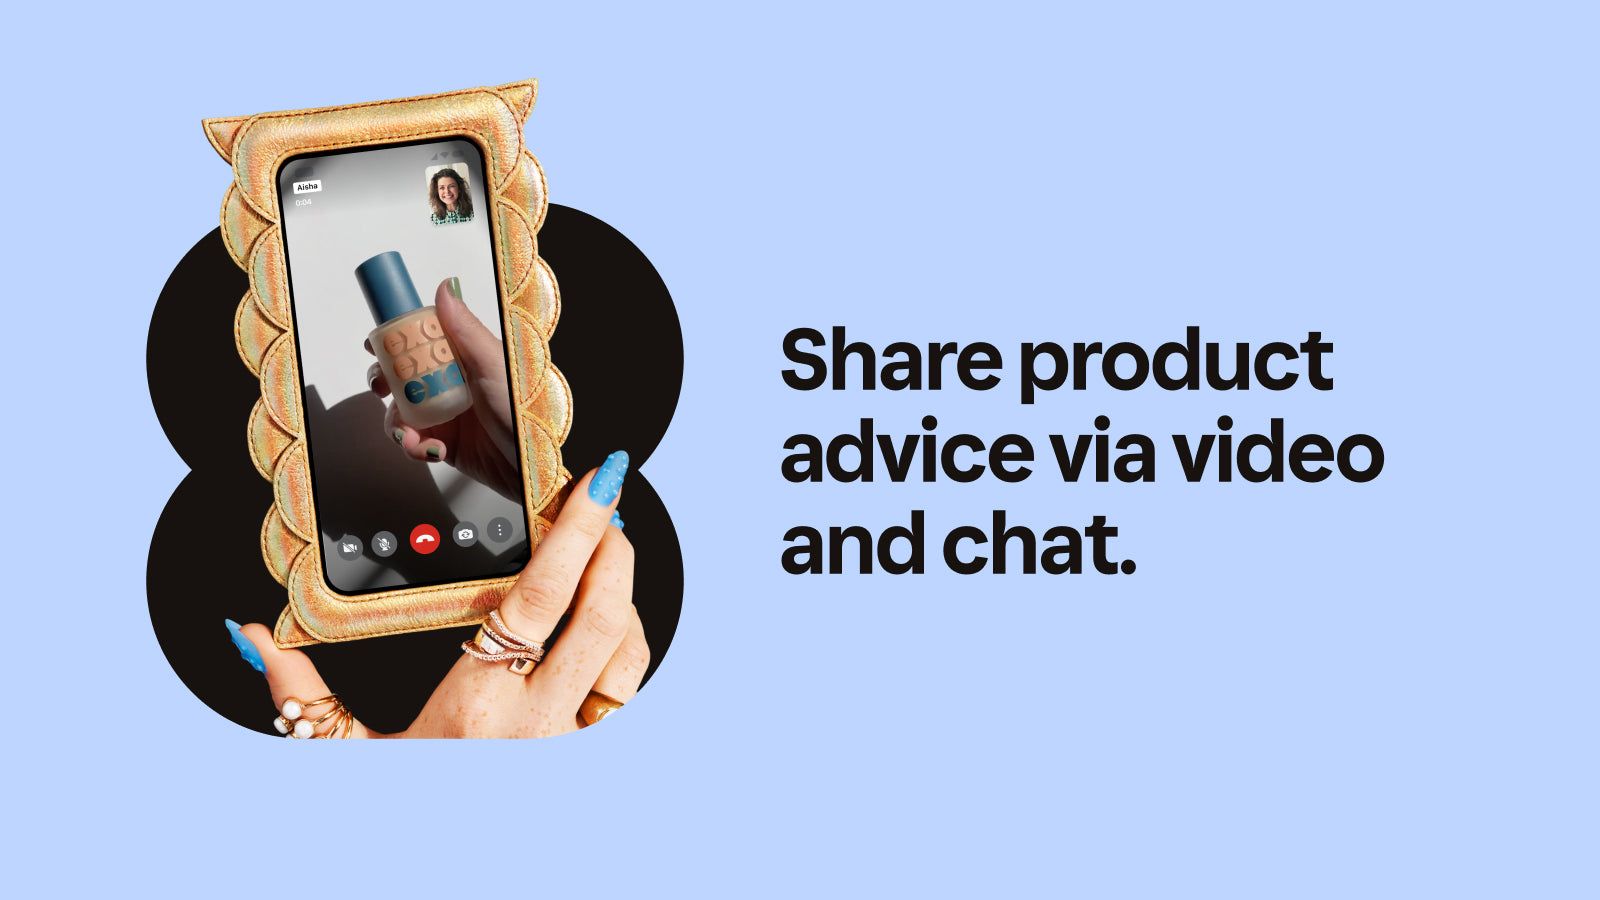 Share product advice via video and chat